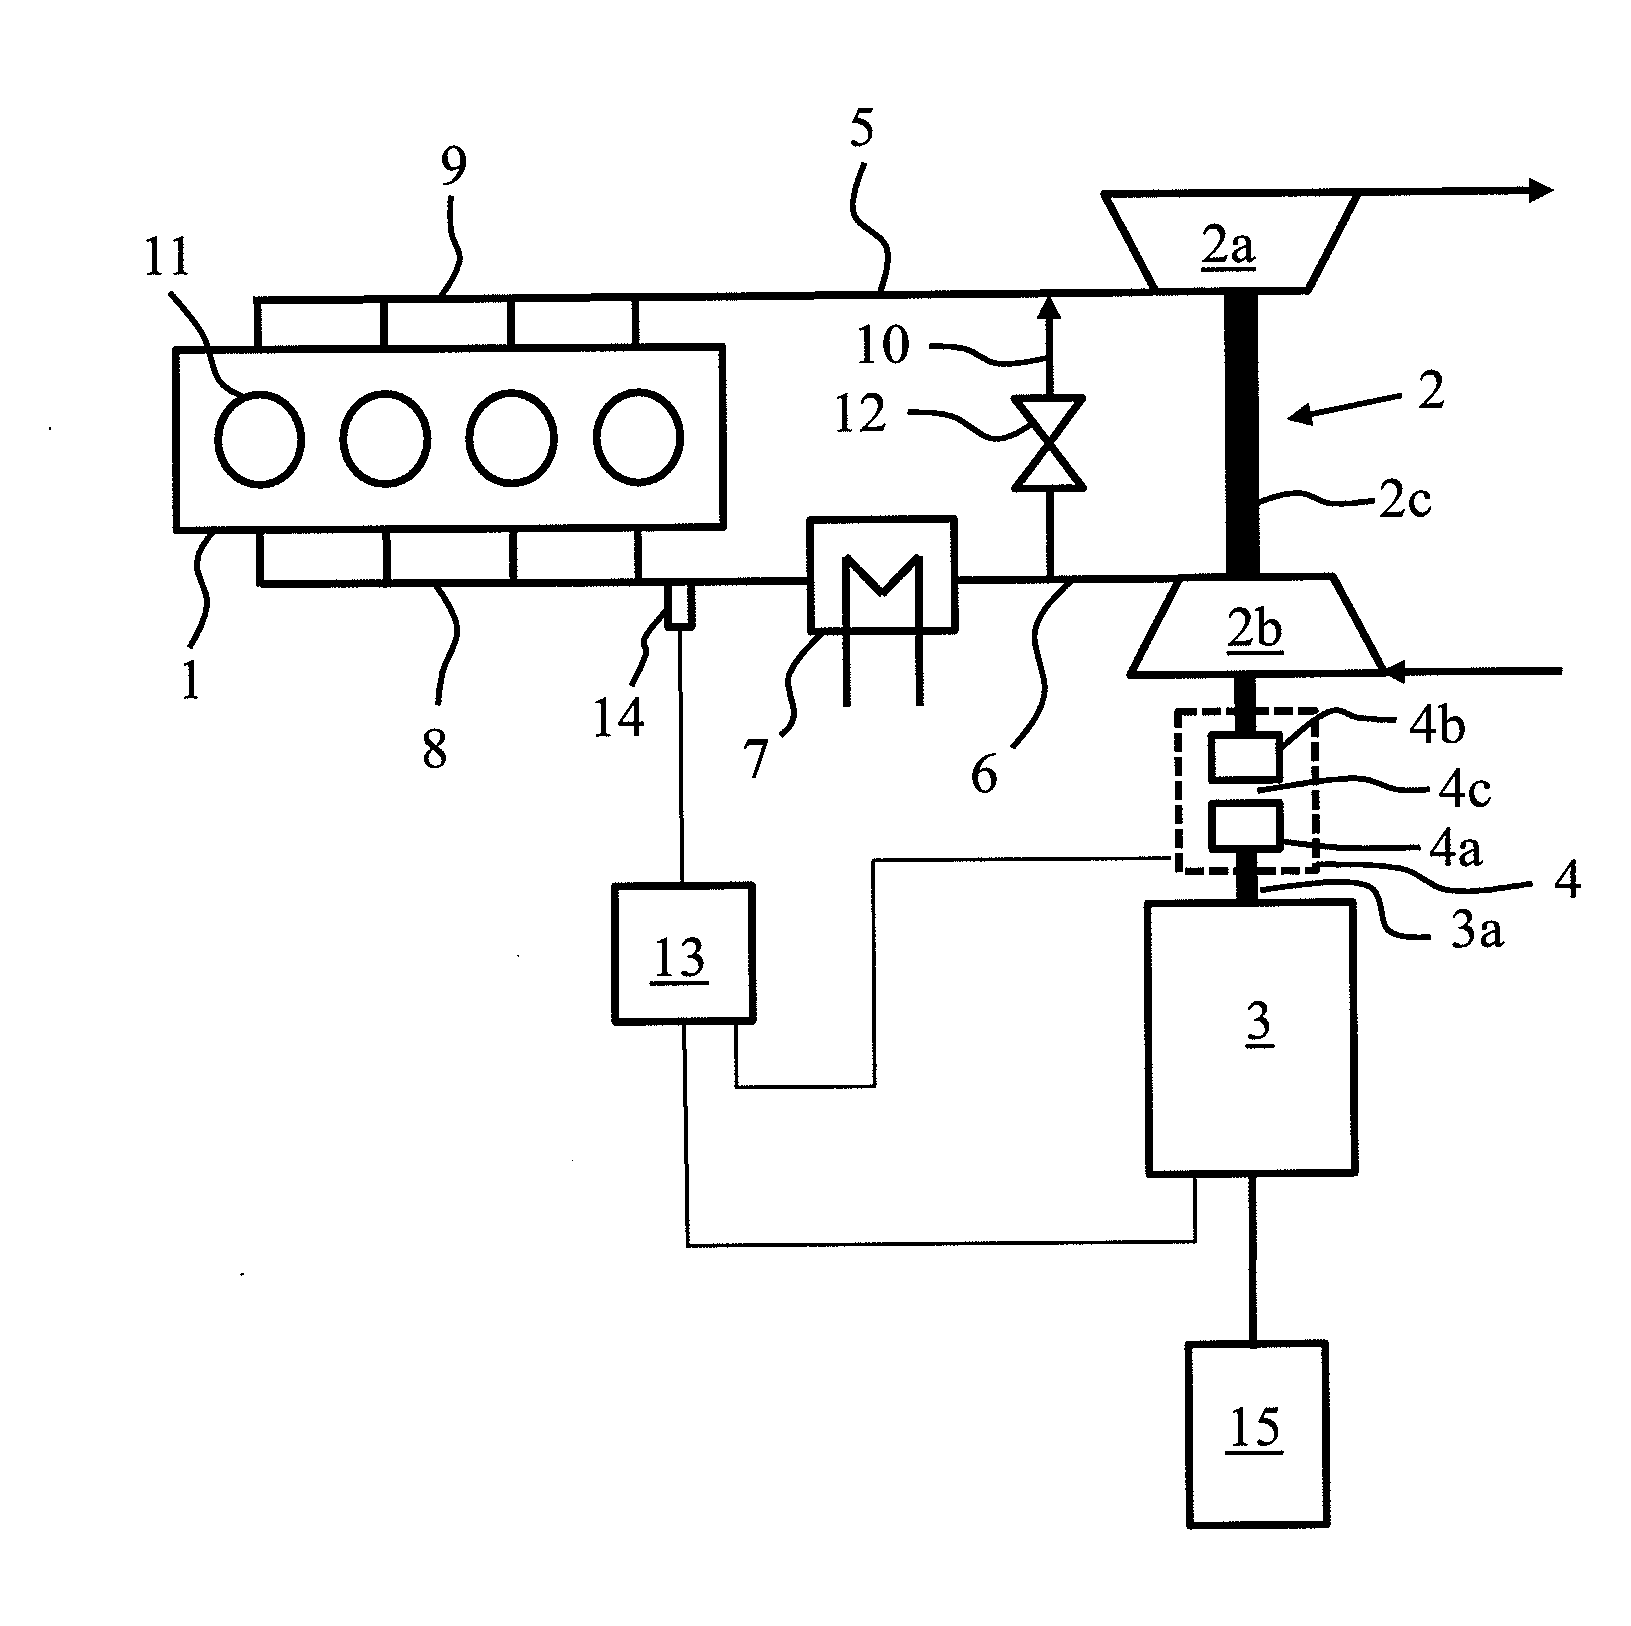 Turbocharging arrangement and method for operating an internal combustion engine